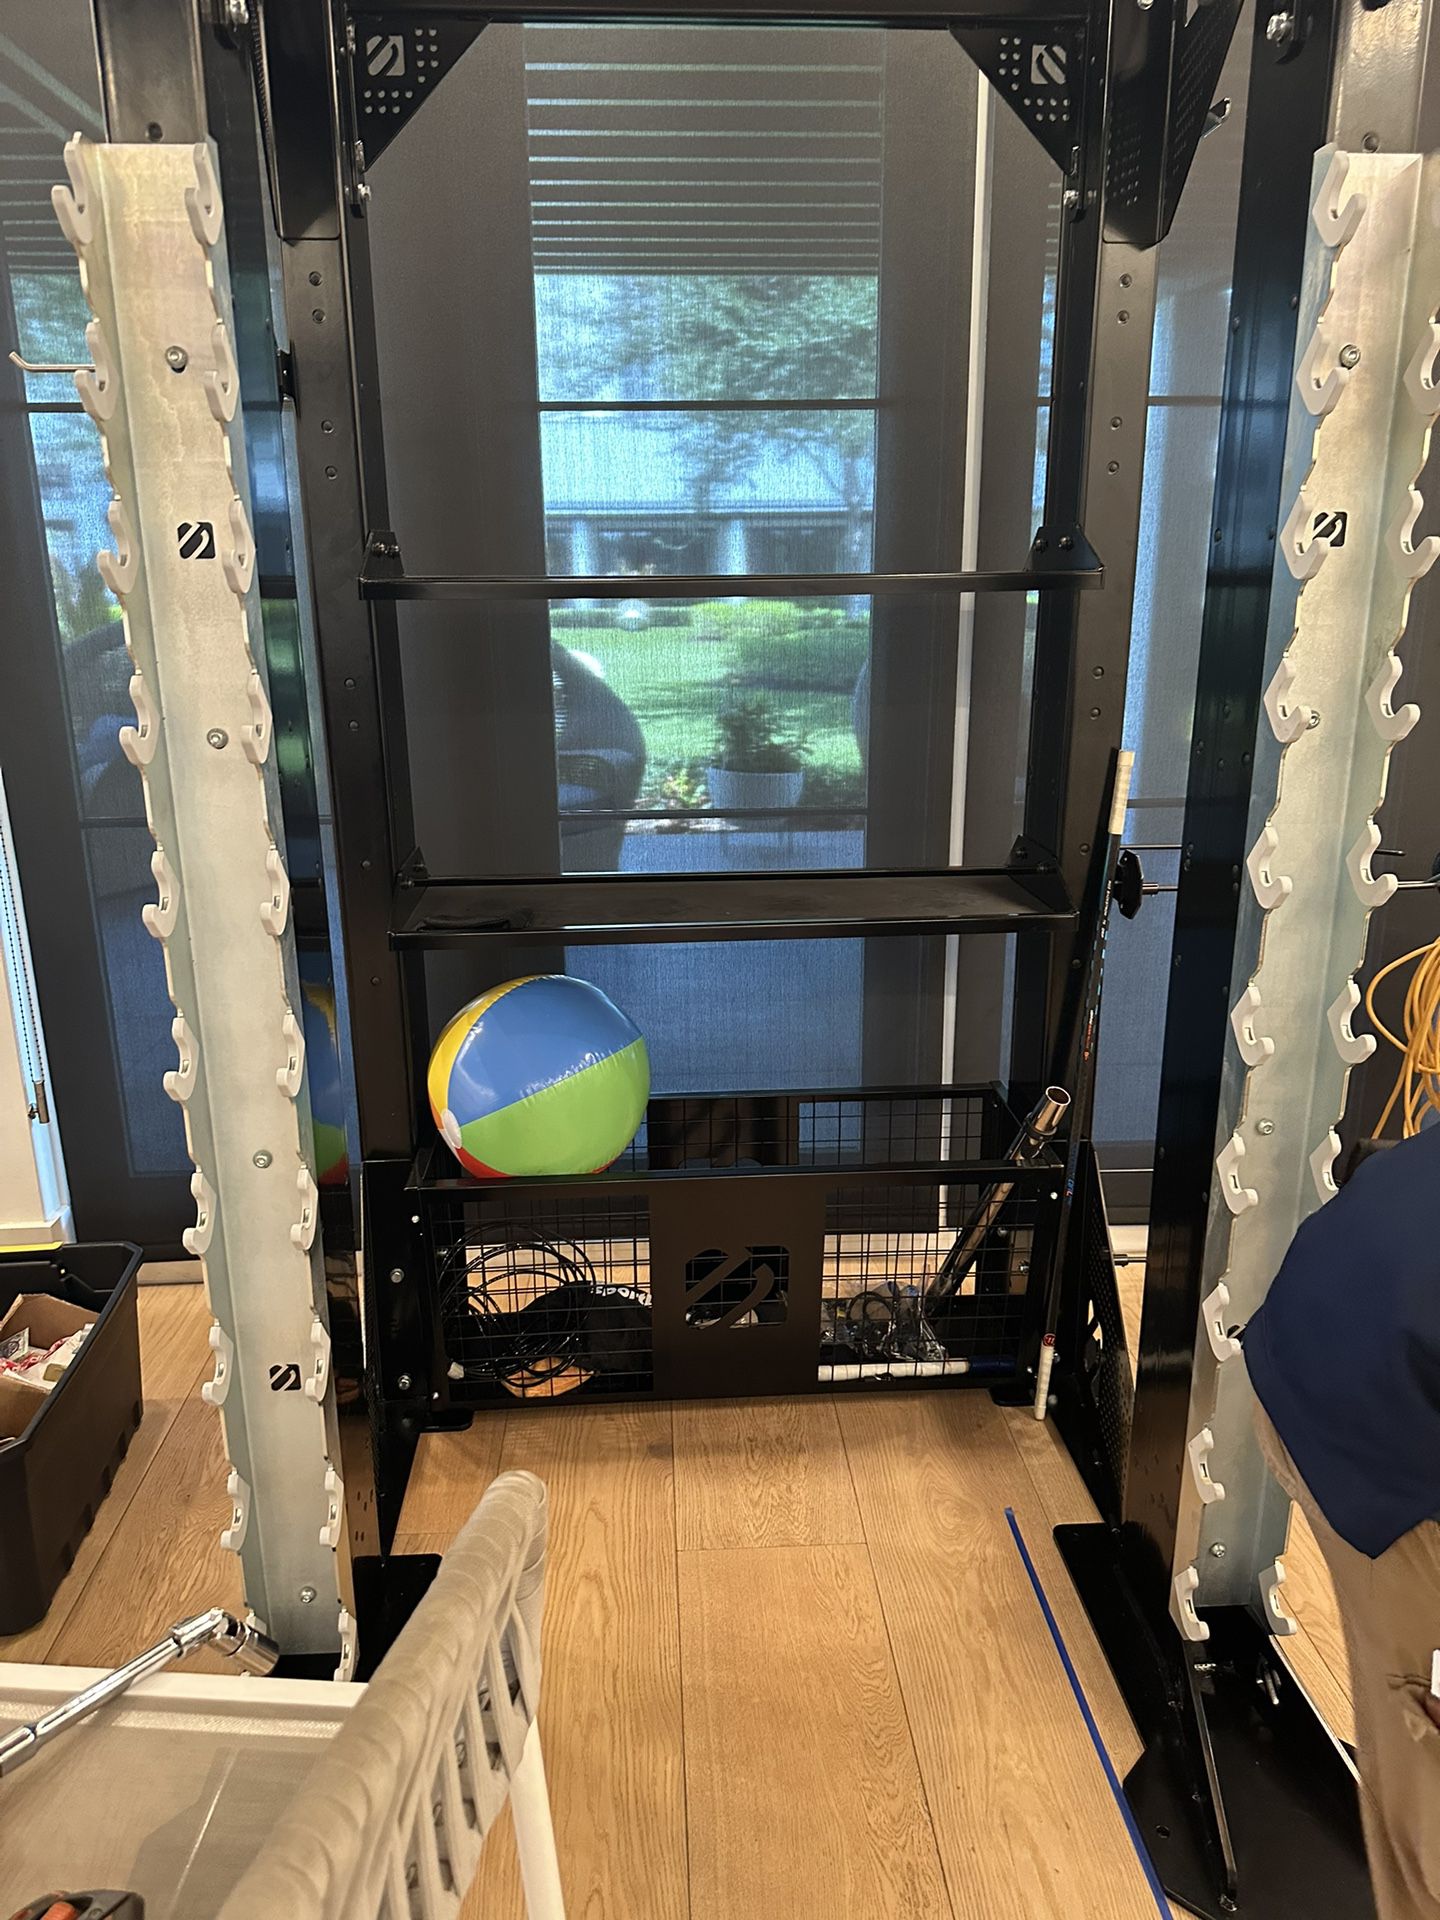 Escape Fitness Large Standing rack with 550lbs dumbbells - $1,849 OBO for everything!